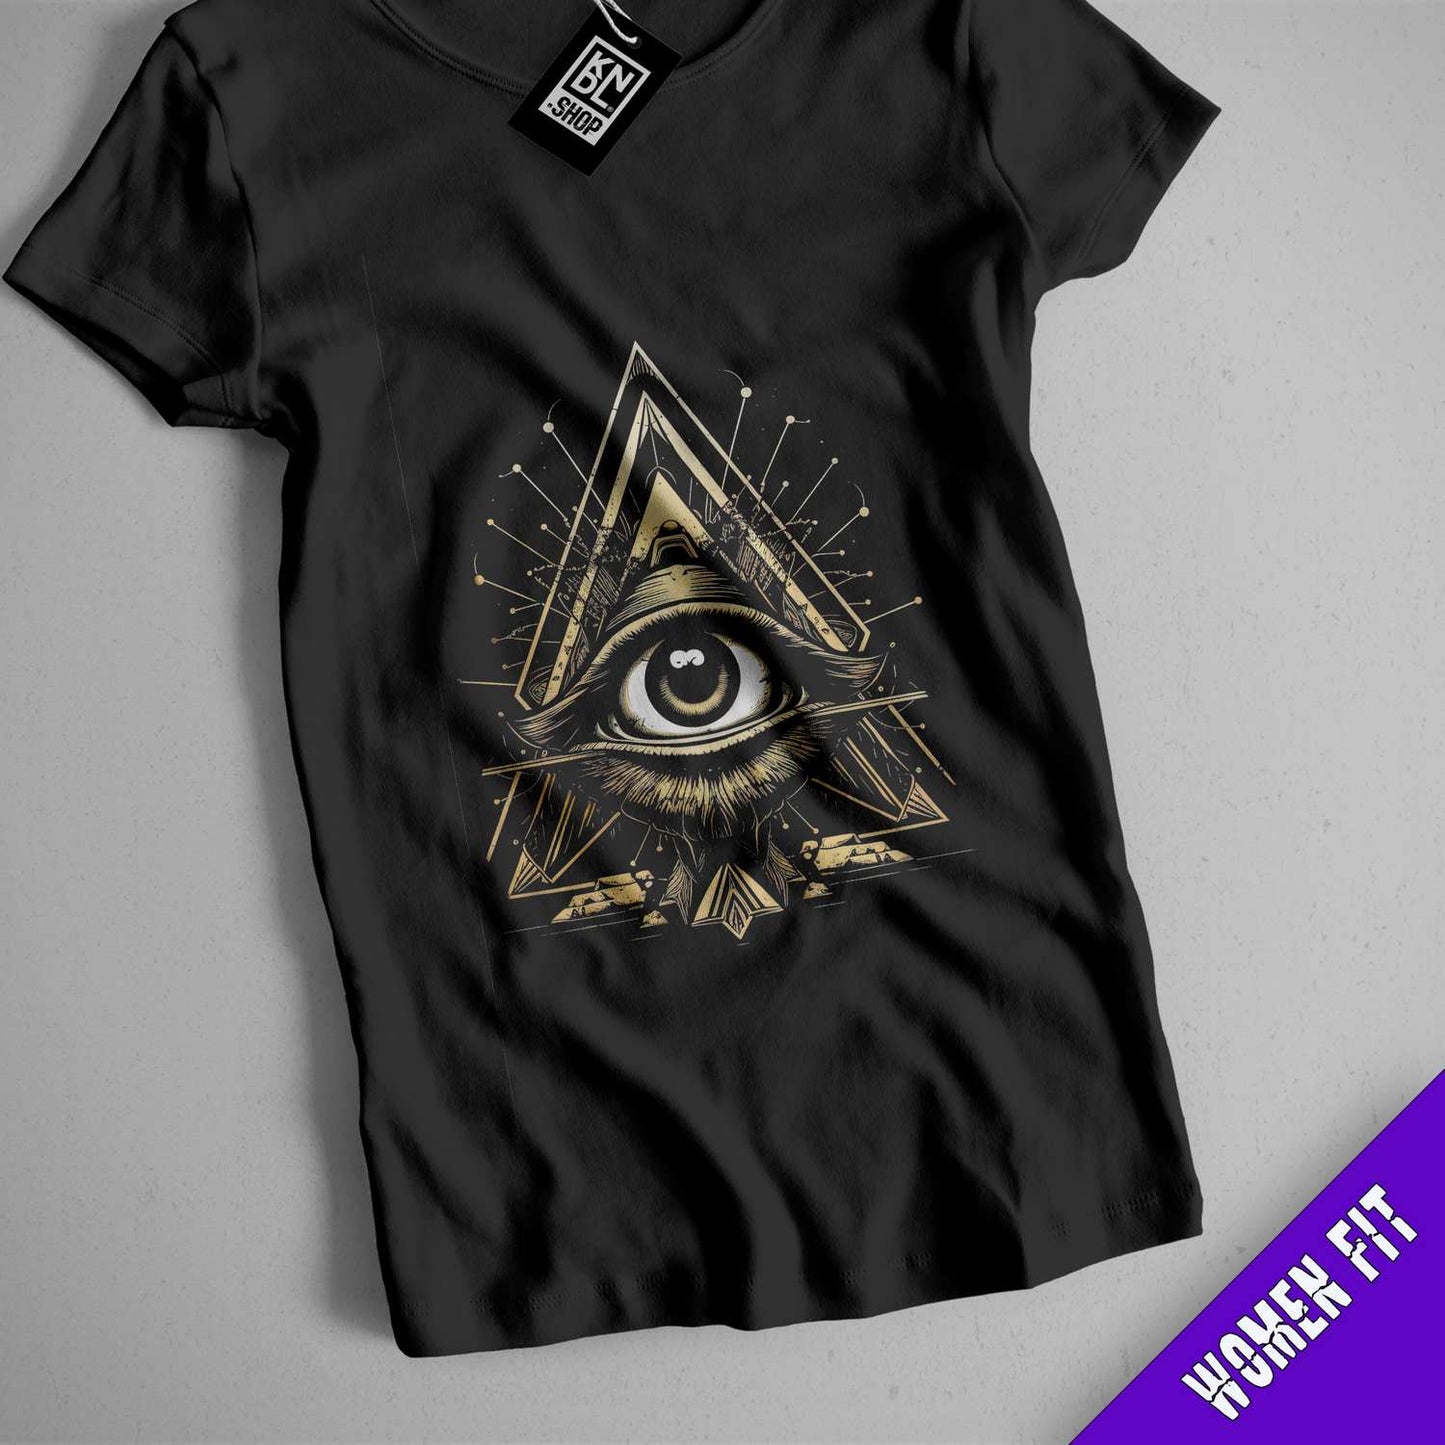 a t - shirt with an all seeing eye on it